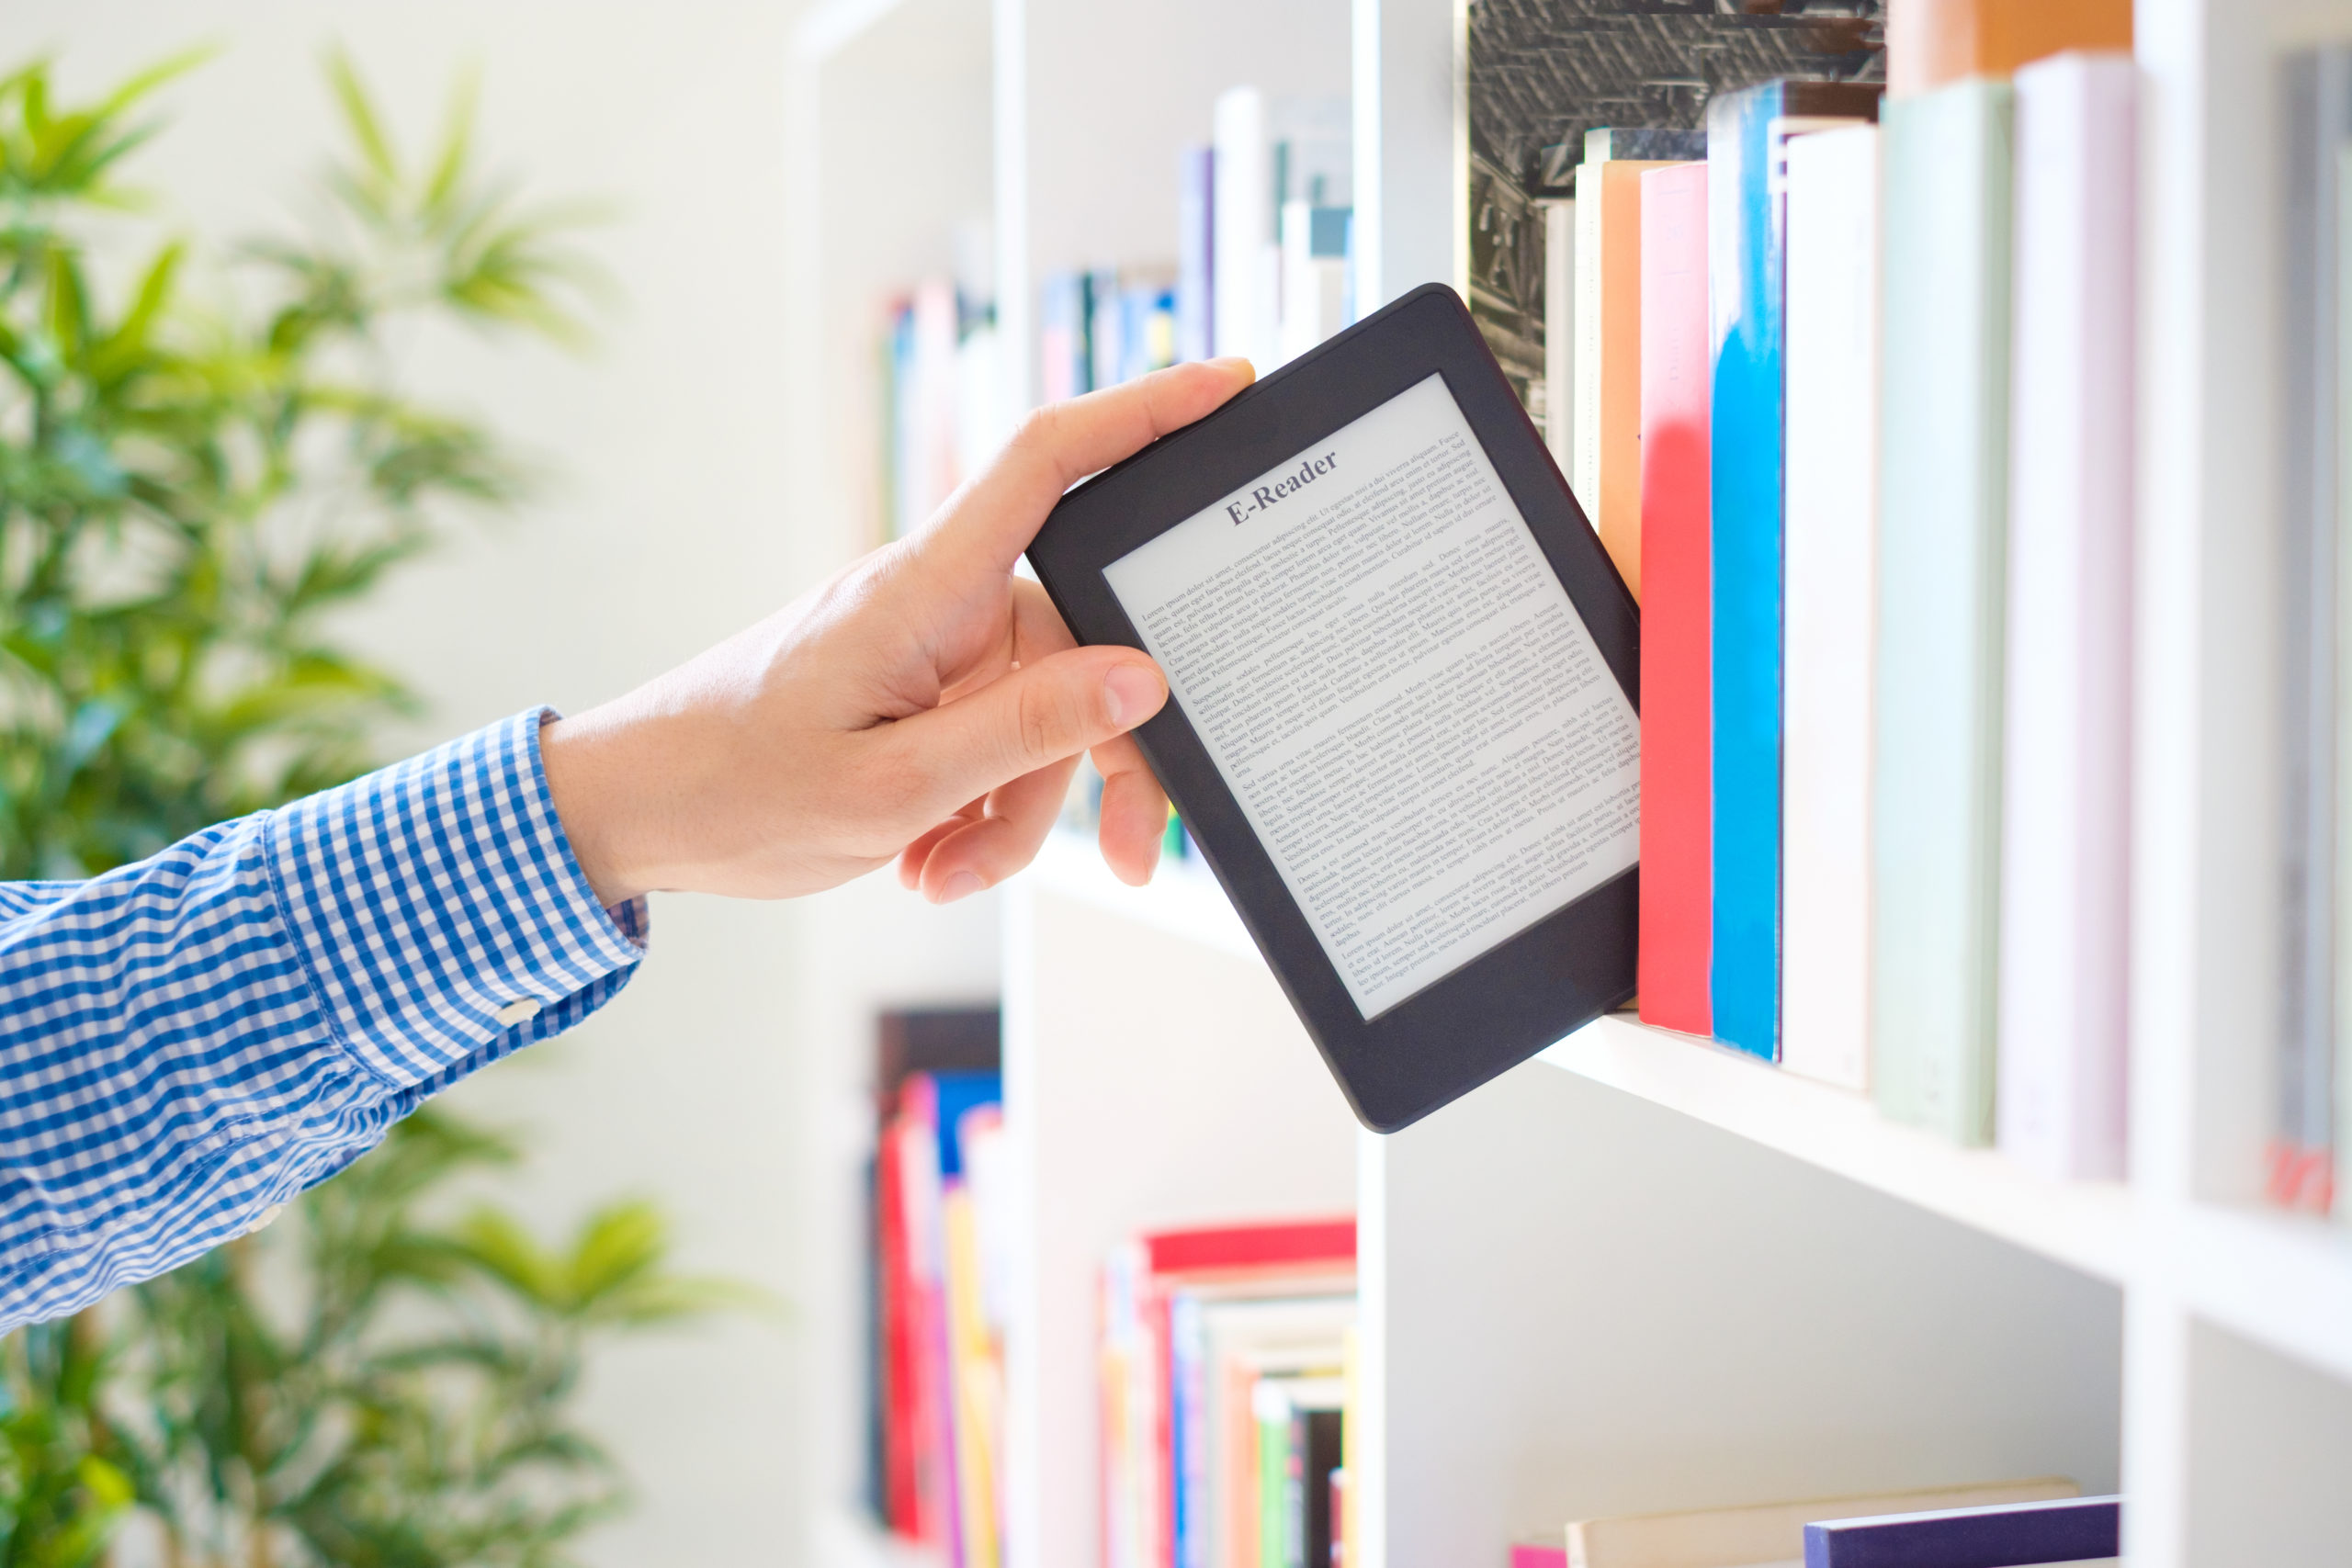 Ready to launch an ebook to generate new leads? Check out these 9 ebook examples that show how you can create content that converts.